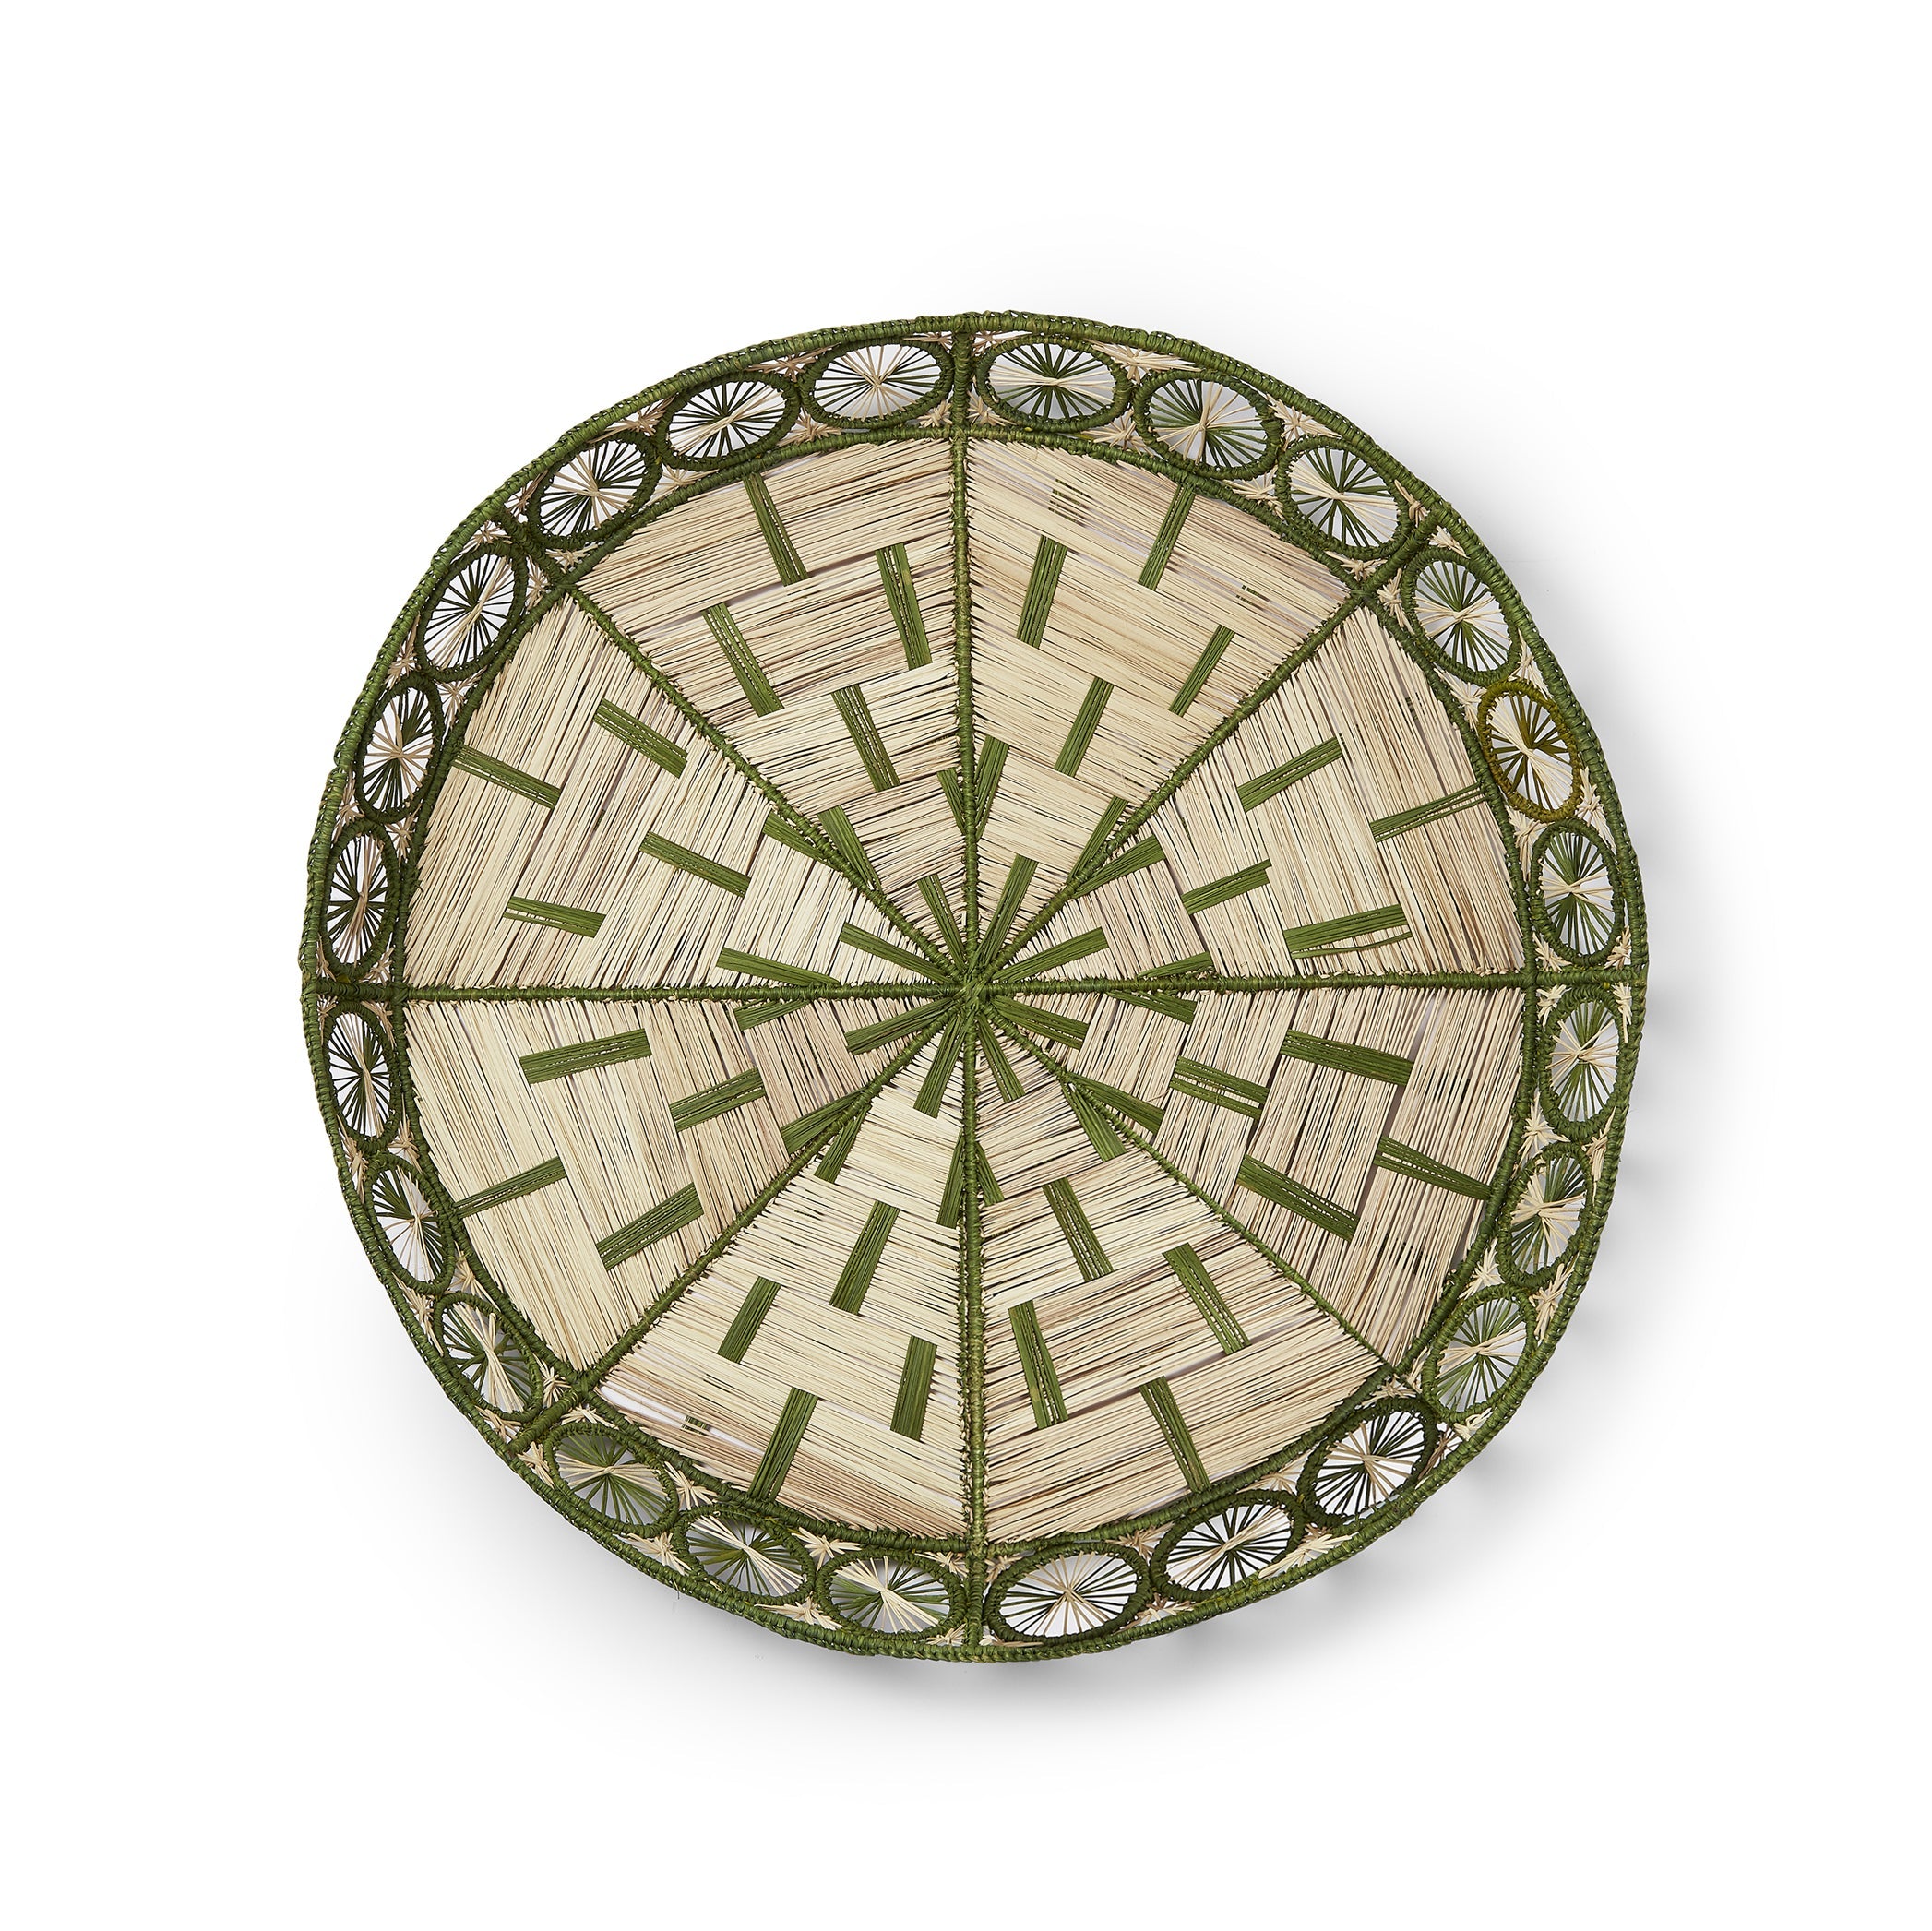 Handwoven Round Tray in Natural and Green, 50cm